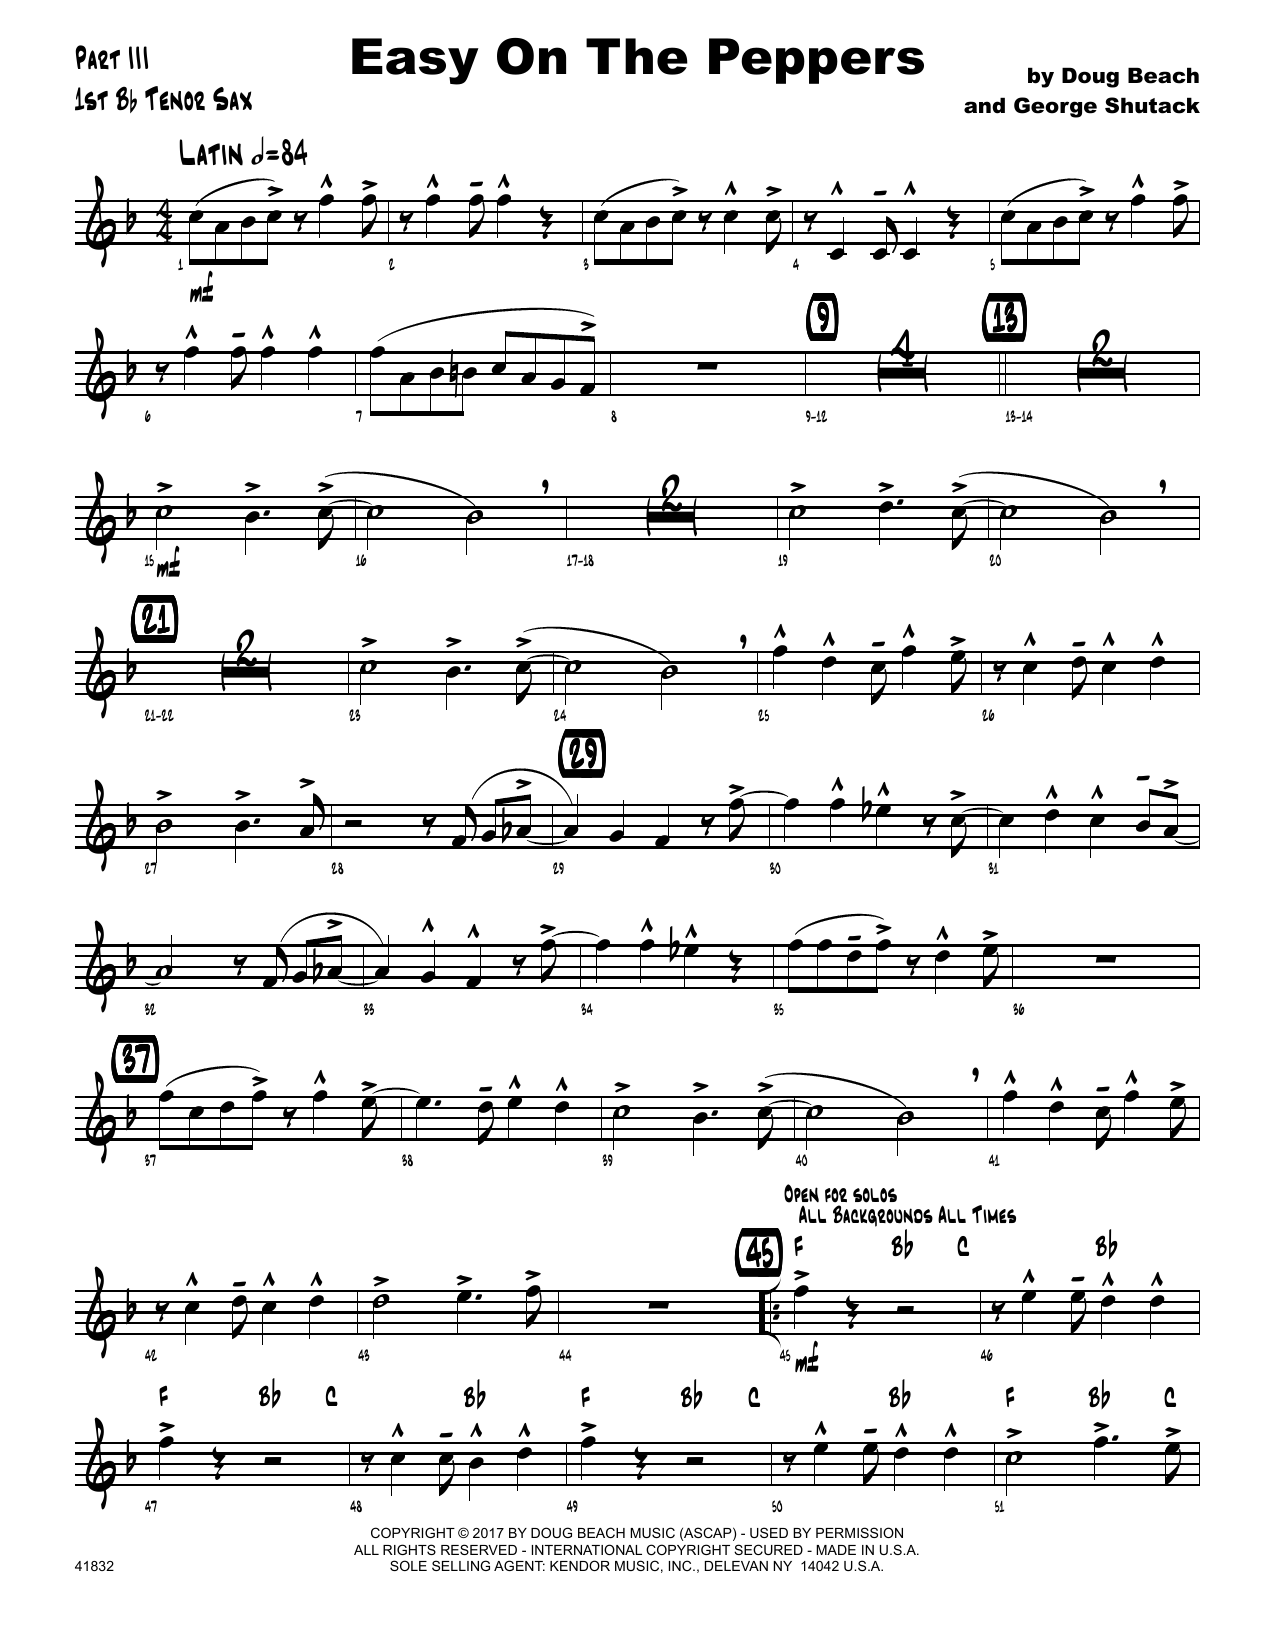 Download Doug Beach & George Shutack Easy On The Peppers - 1st Tenor Saxopho Sheet Music